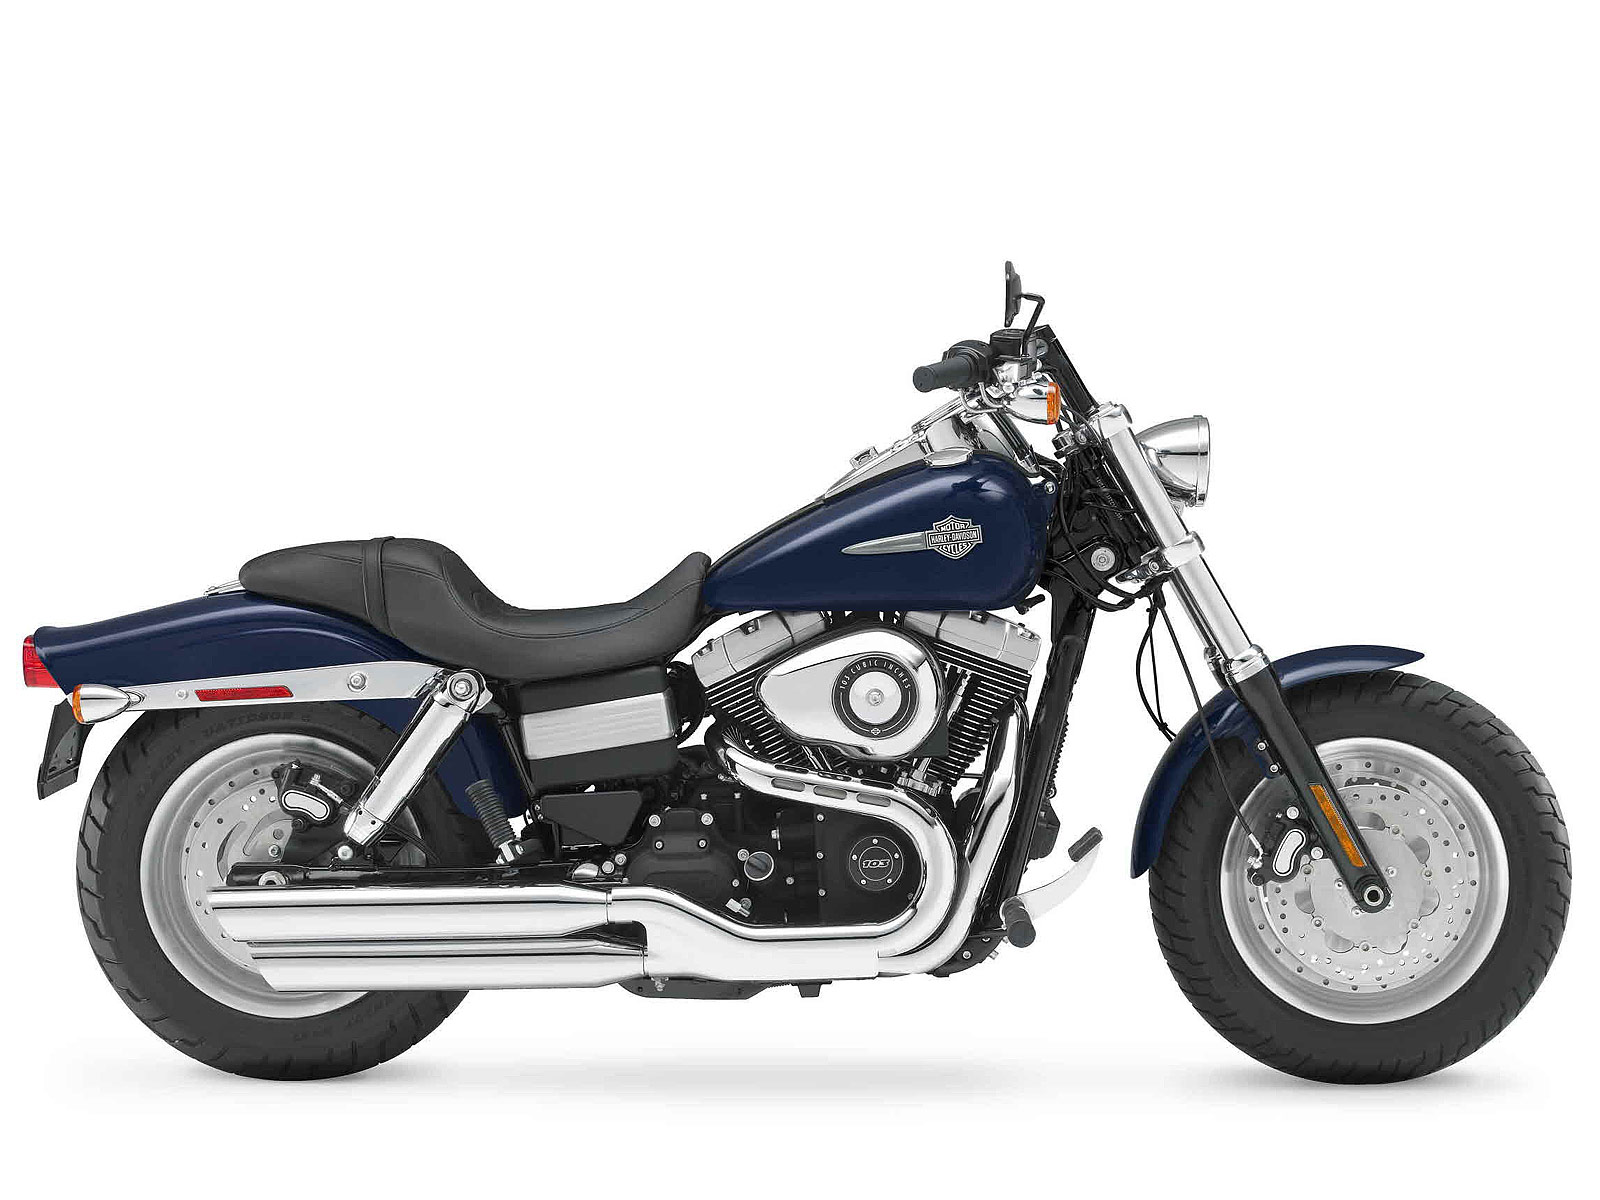 2012 FXDF Dyna Fat Bob Harley Davidson pictures review specs